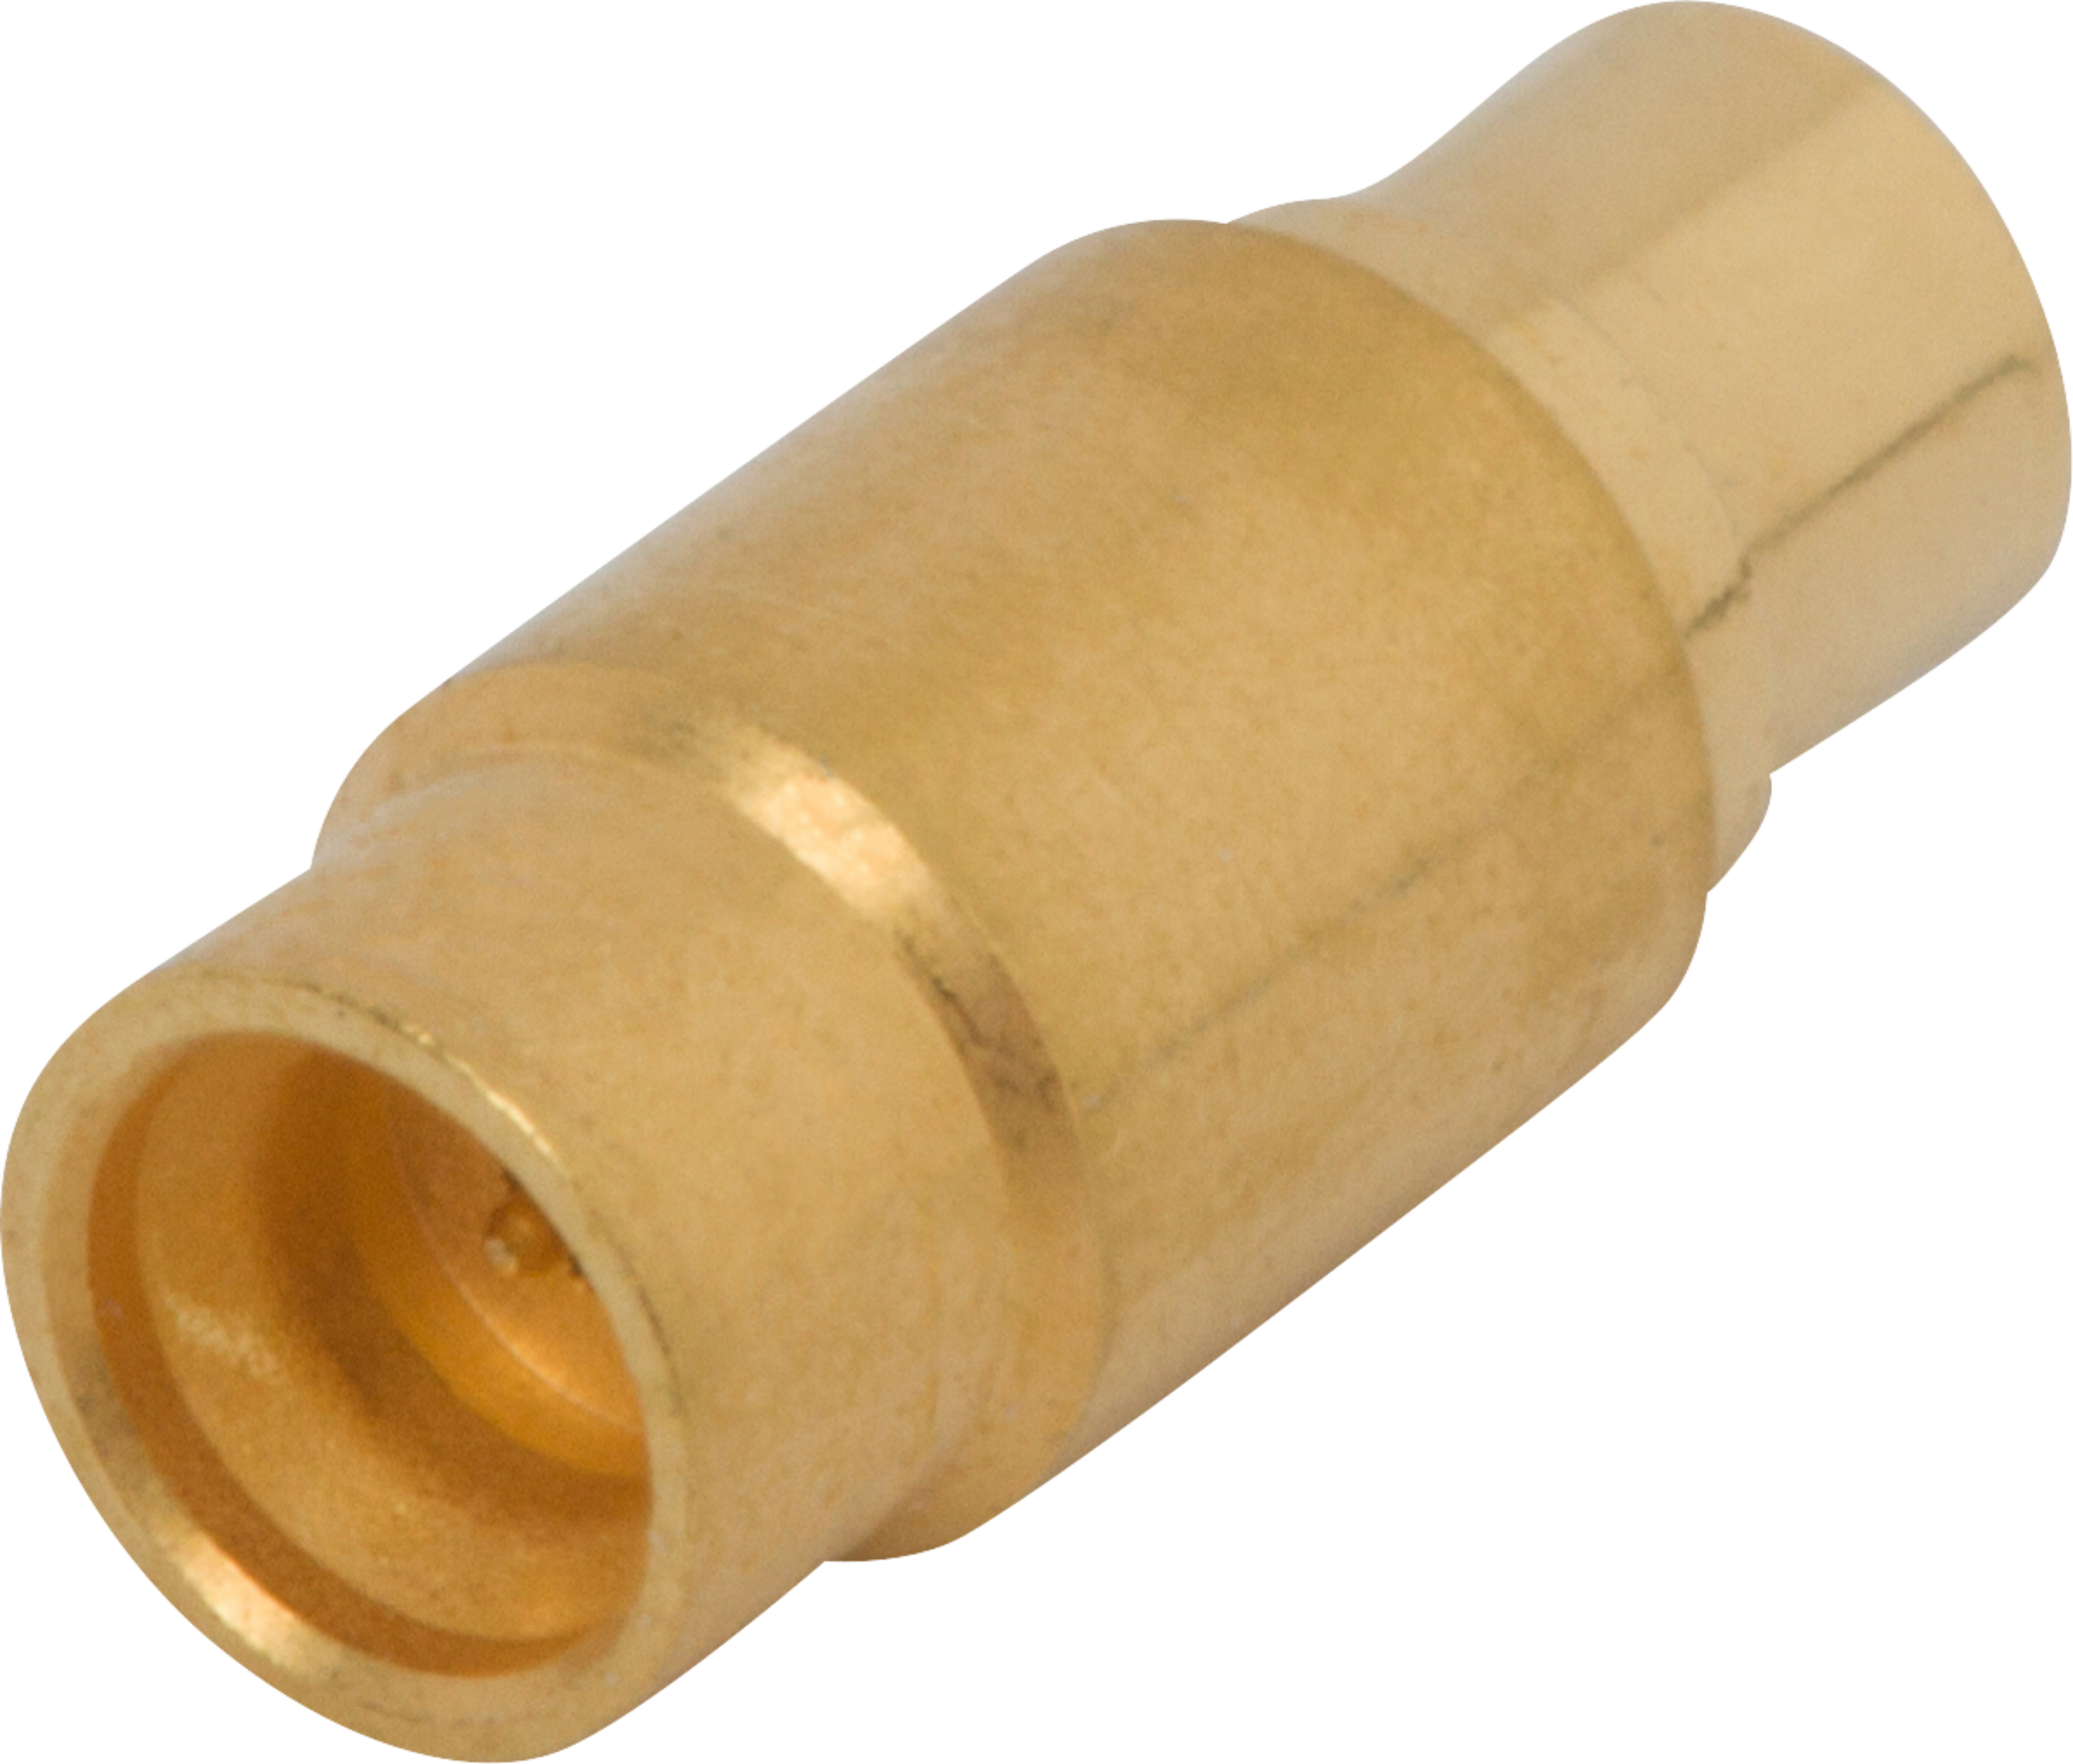 Picture of SMPS Male Connector for .047 Cable, SB